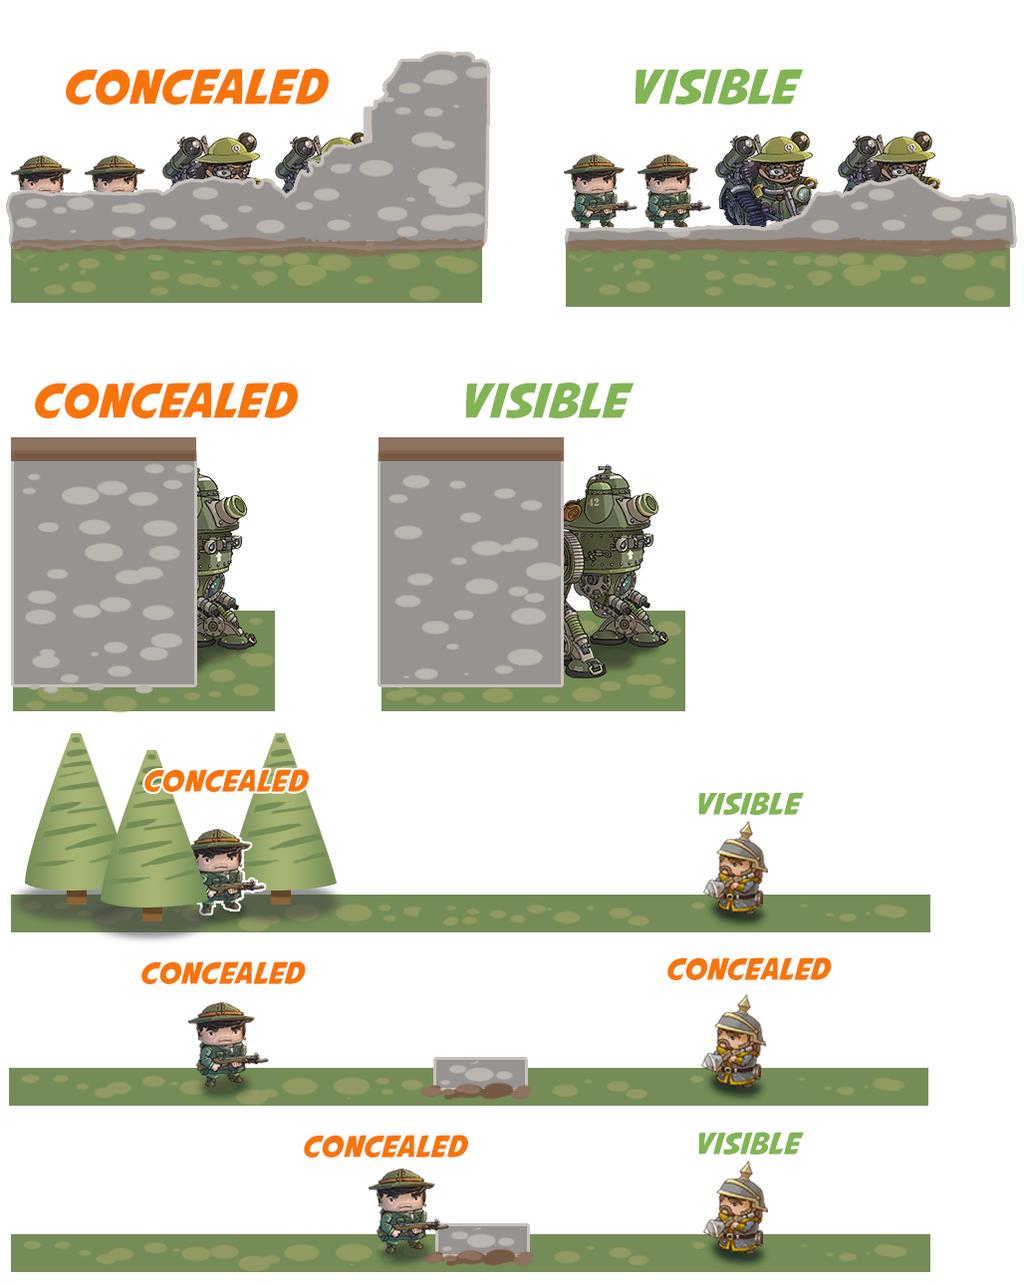 Attacking Each individual unit in a squad targets and attacks enemy squads individually. But all units of the same type in a squad must attack the same squad.